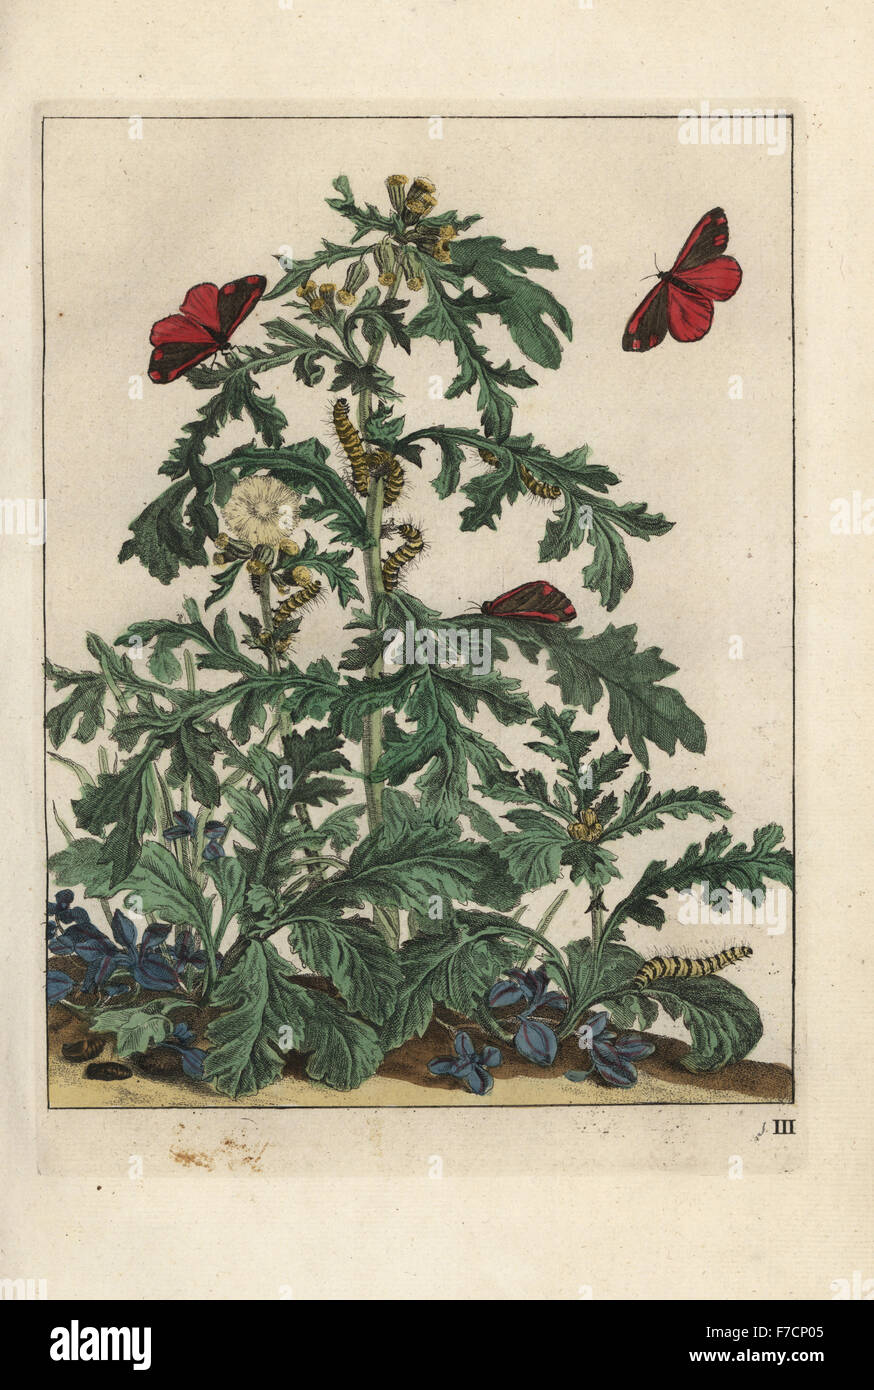 Cinnabar moth, Tyria jacobaeae, larva and pupa on ragwort plant, Jacobaea vulgaris. St. Jans beestje. Handcoloured copperplate engraving drawn and etched by Jacob l'Admiral in Naauwkeurige Waarneemingen omtrent de veranderingen van veele Insekten (Accurate Descriptions of Insect Metamorphoses), J. Sluyter, Amsterdam, 1774. For this second edition, M. Houttuyn added another eight plates to the original 25. Stock Photo